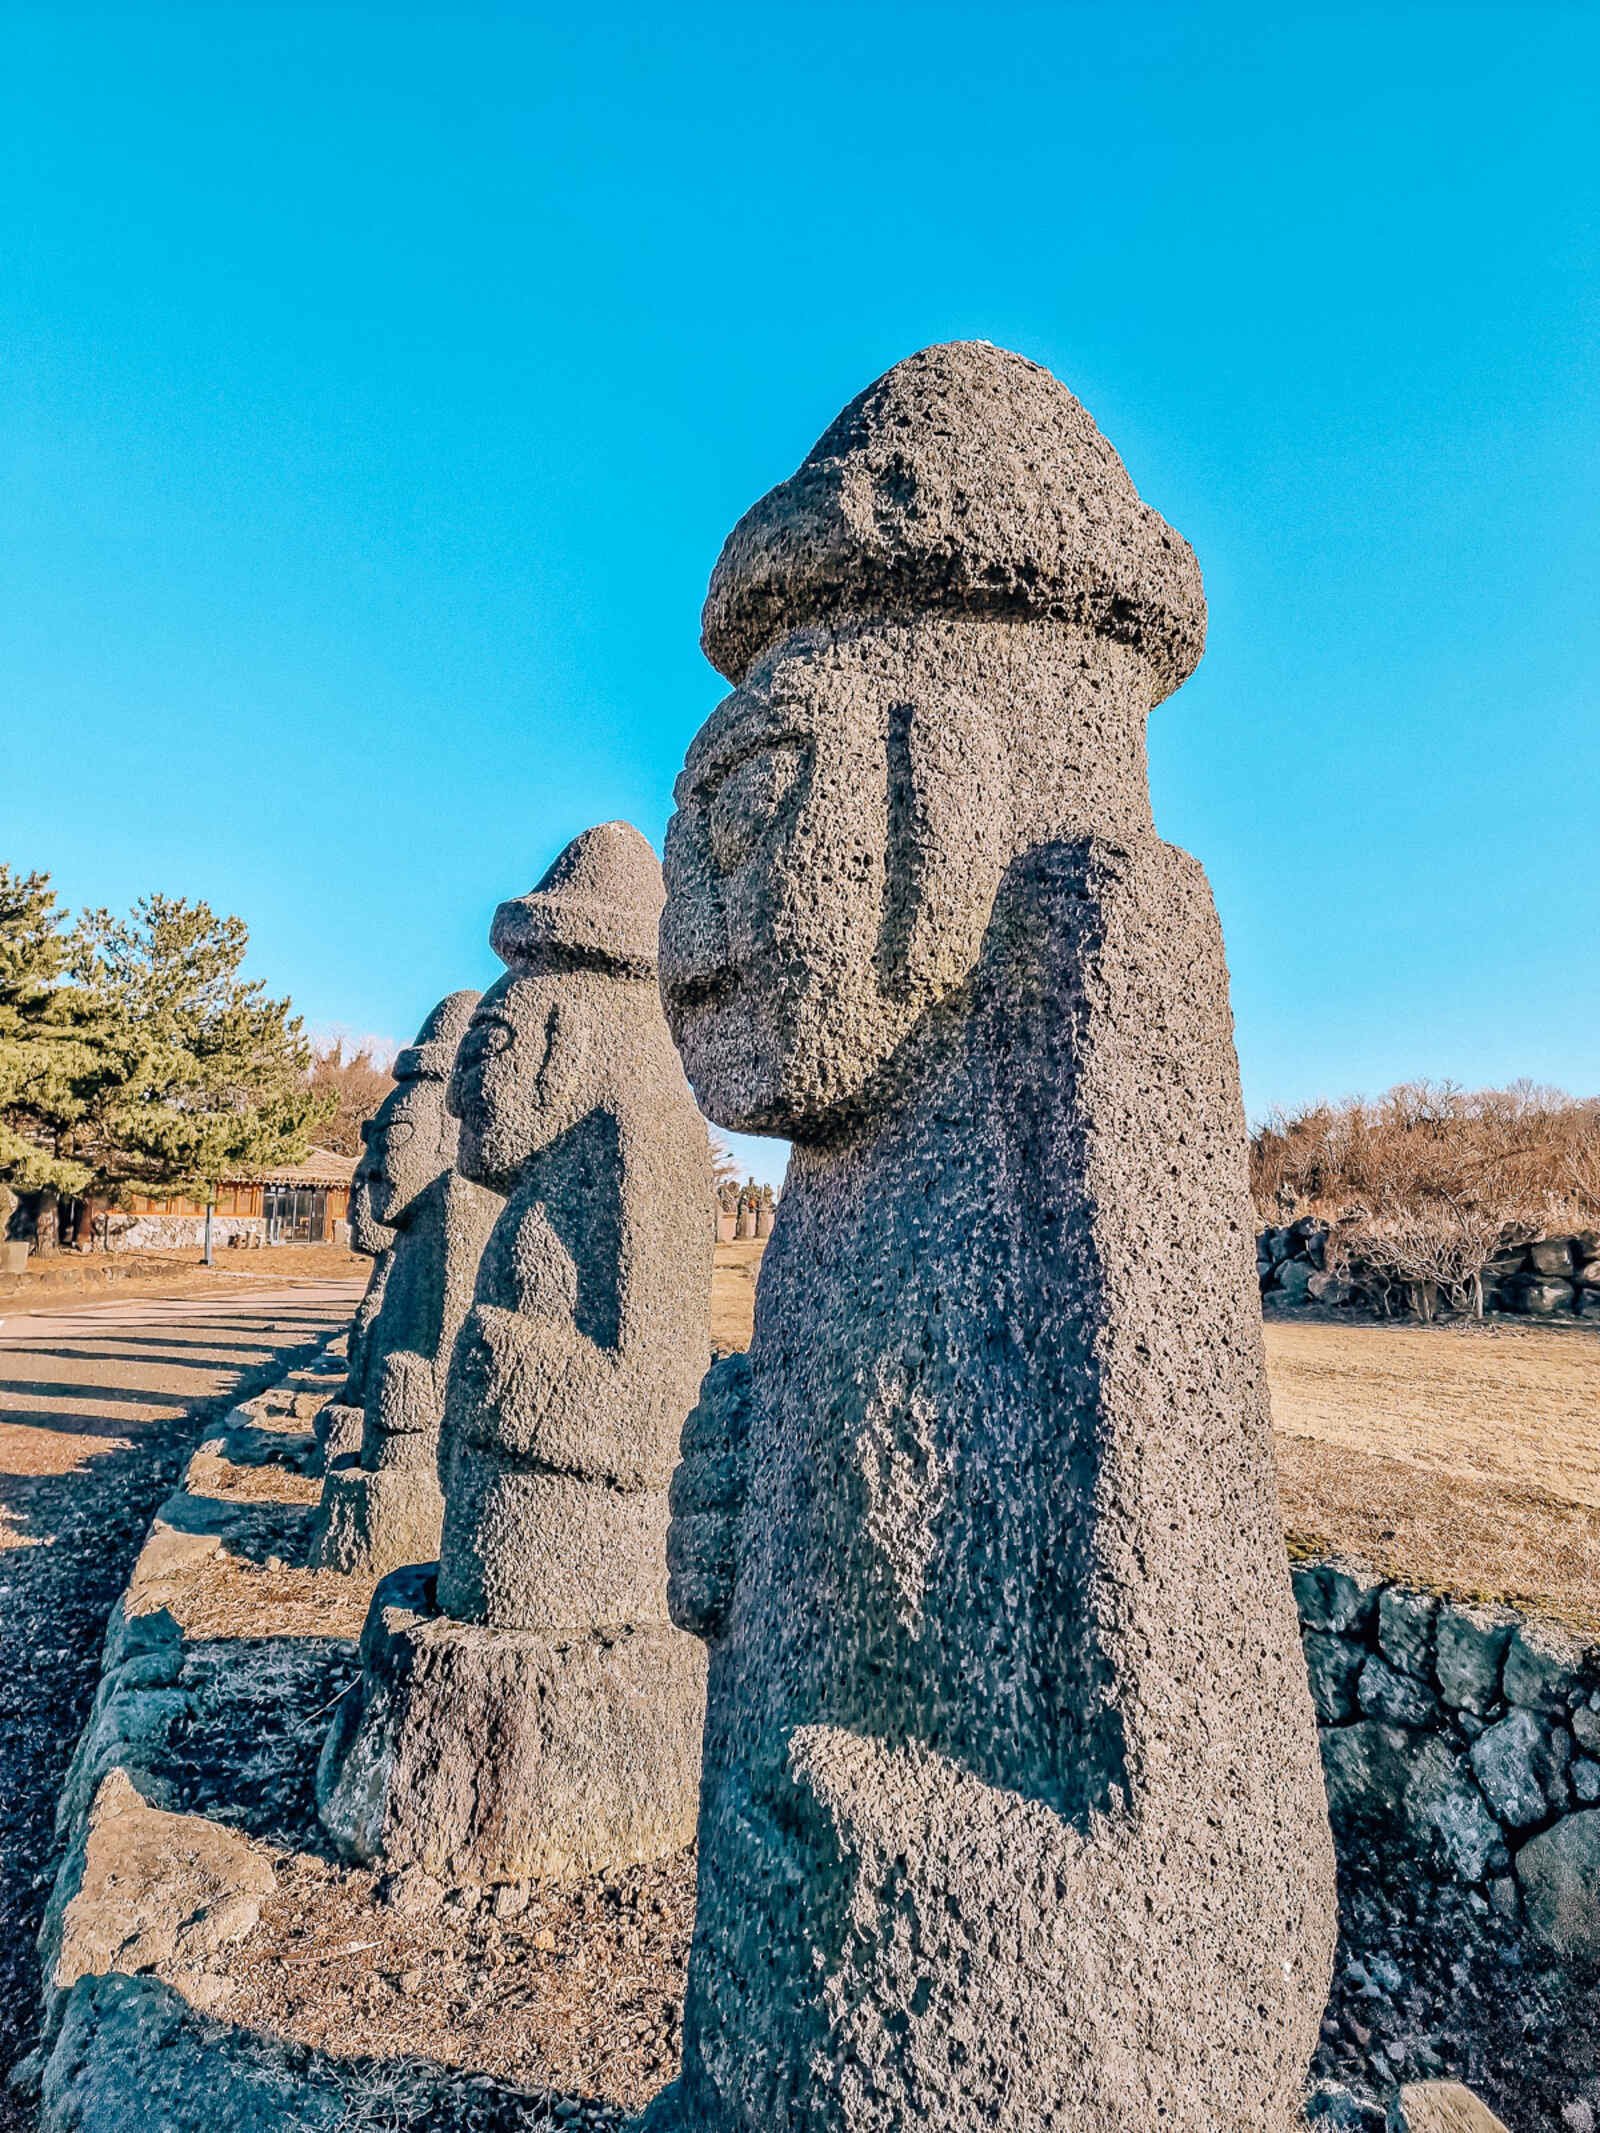 a line of 4 stone statues with faces - the Dol Hareubang of Jeju Island